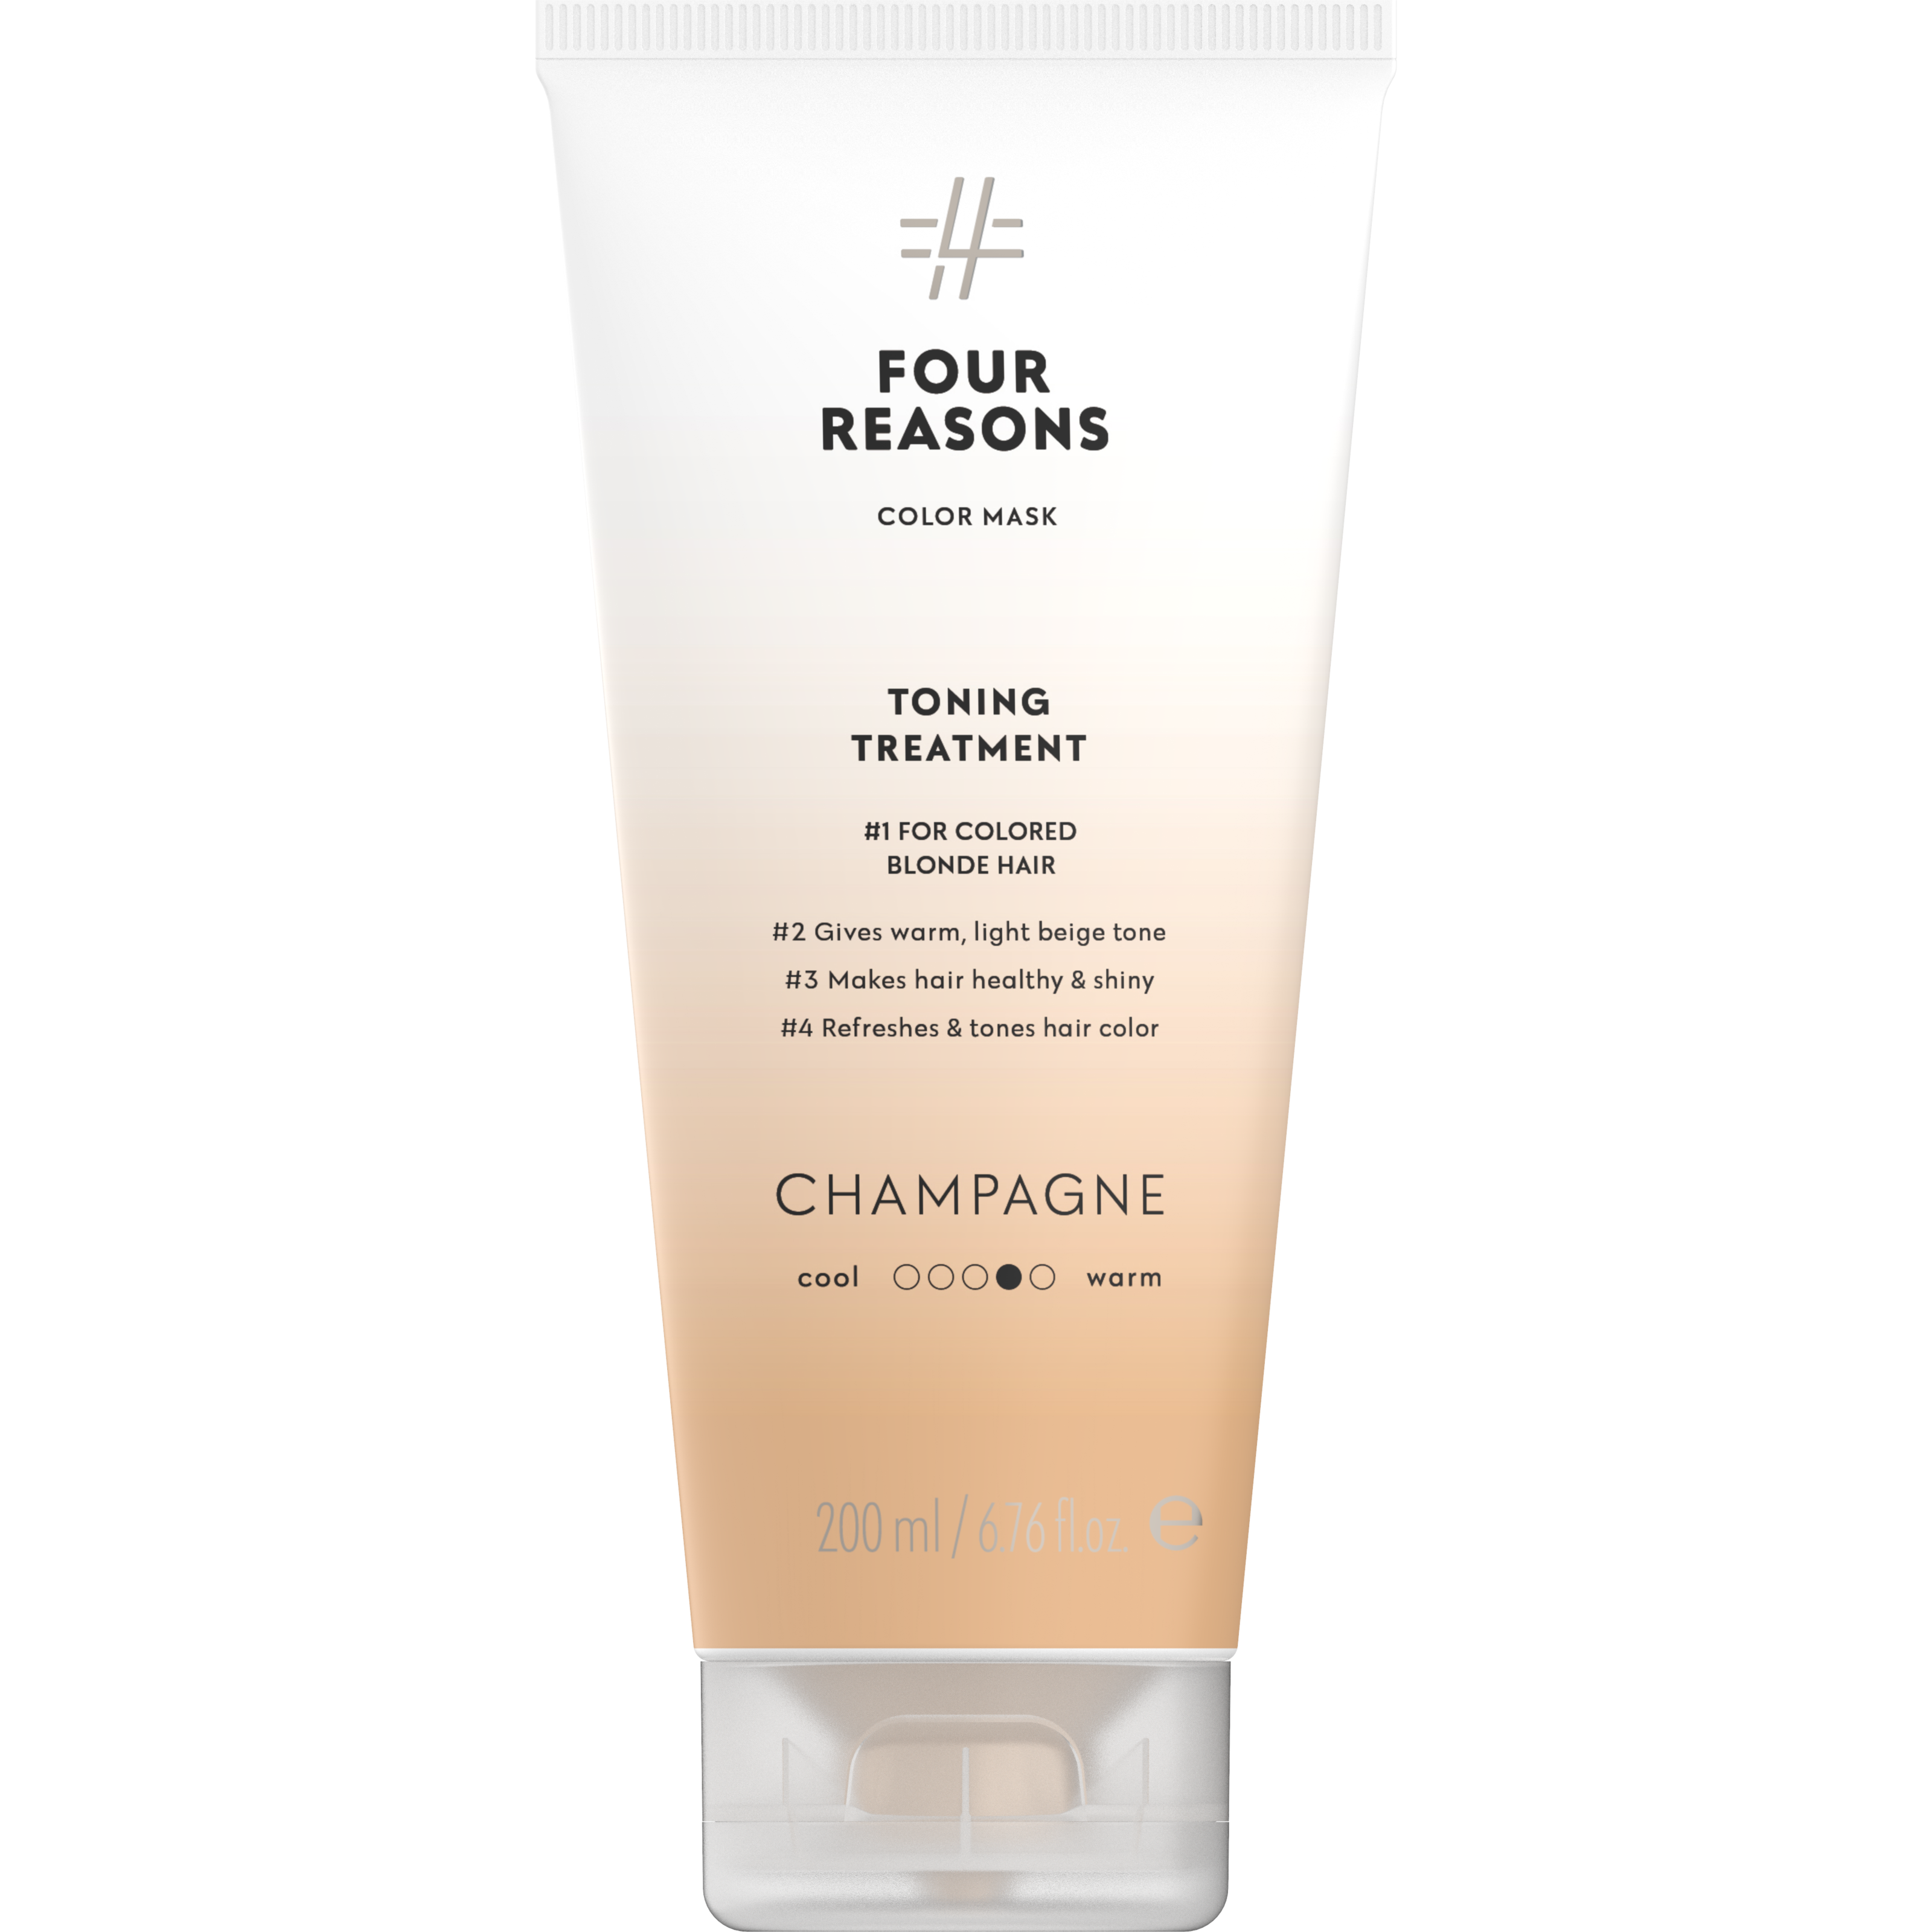 Läs mer om Four Reasons Color Mask Toning Treatment Champagne